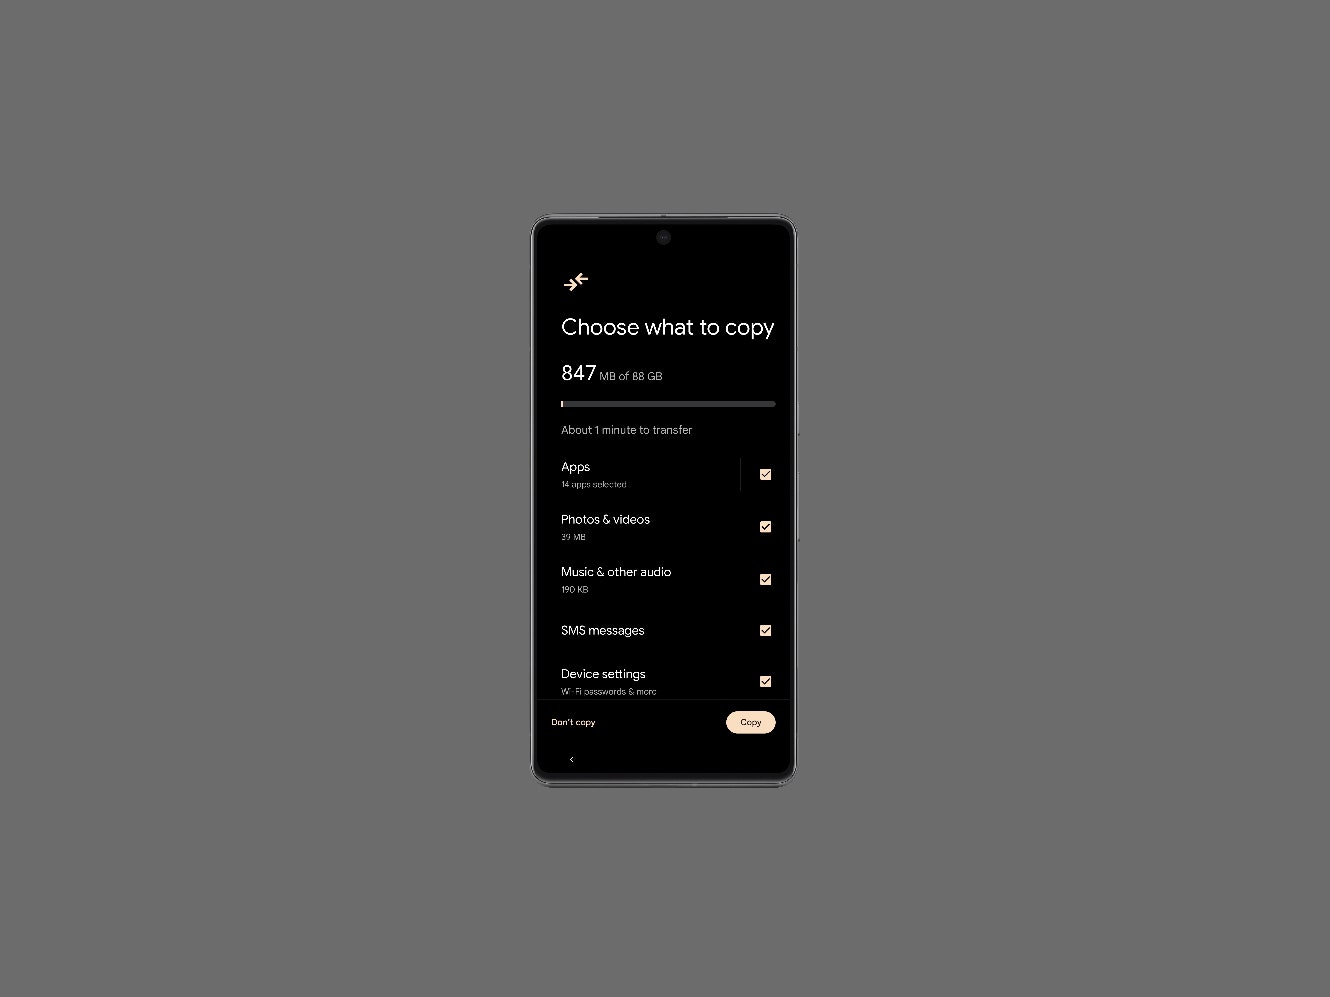 Android smartphone displaying a menu to copy apps over